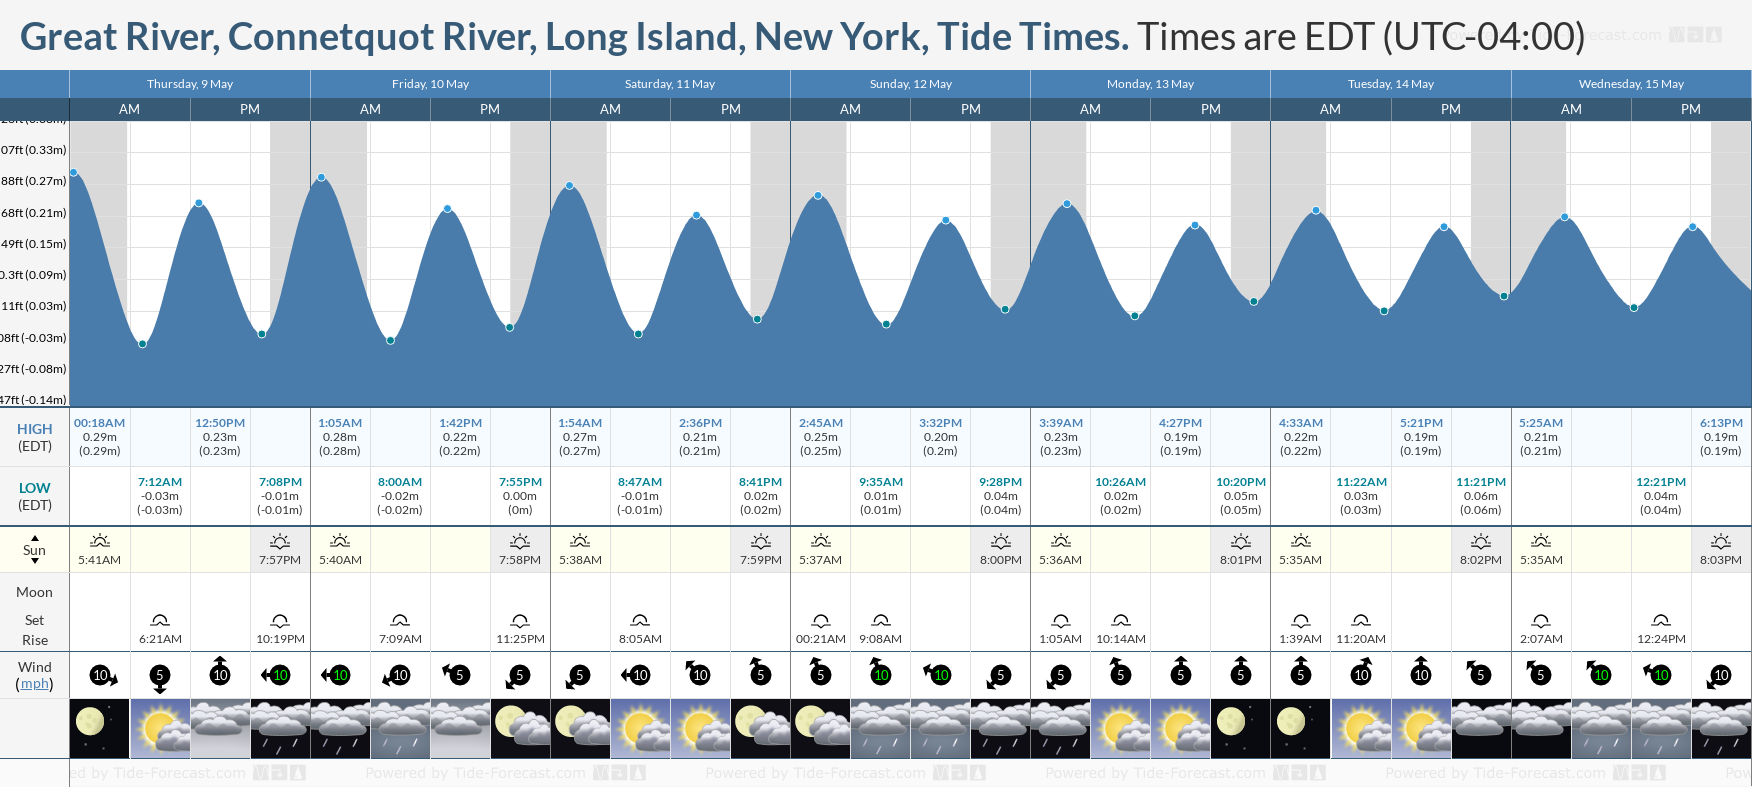 Great River, Connetquot River, Long Island, New York Tide Chart including high and low tide times for the next 7 days